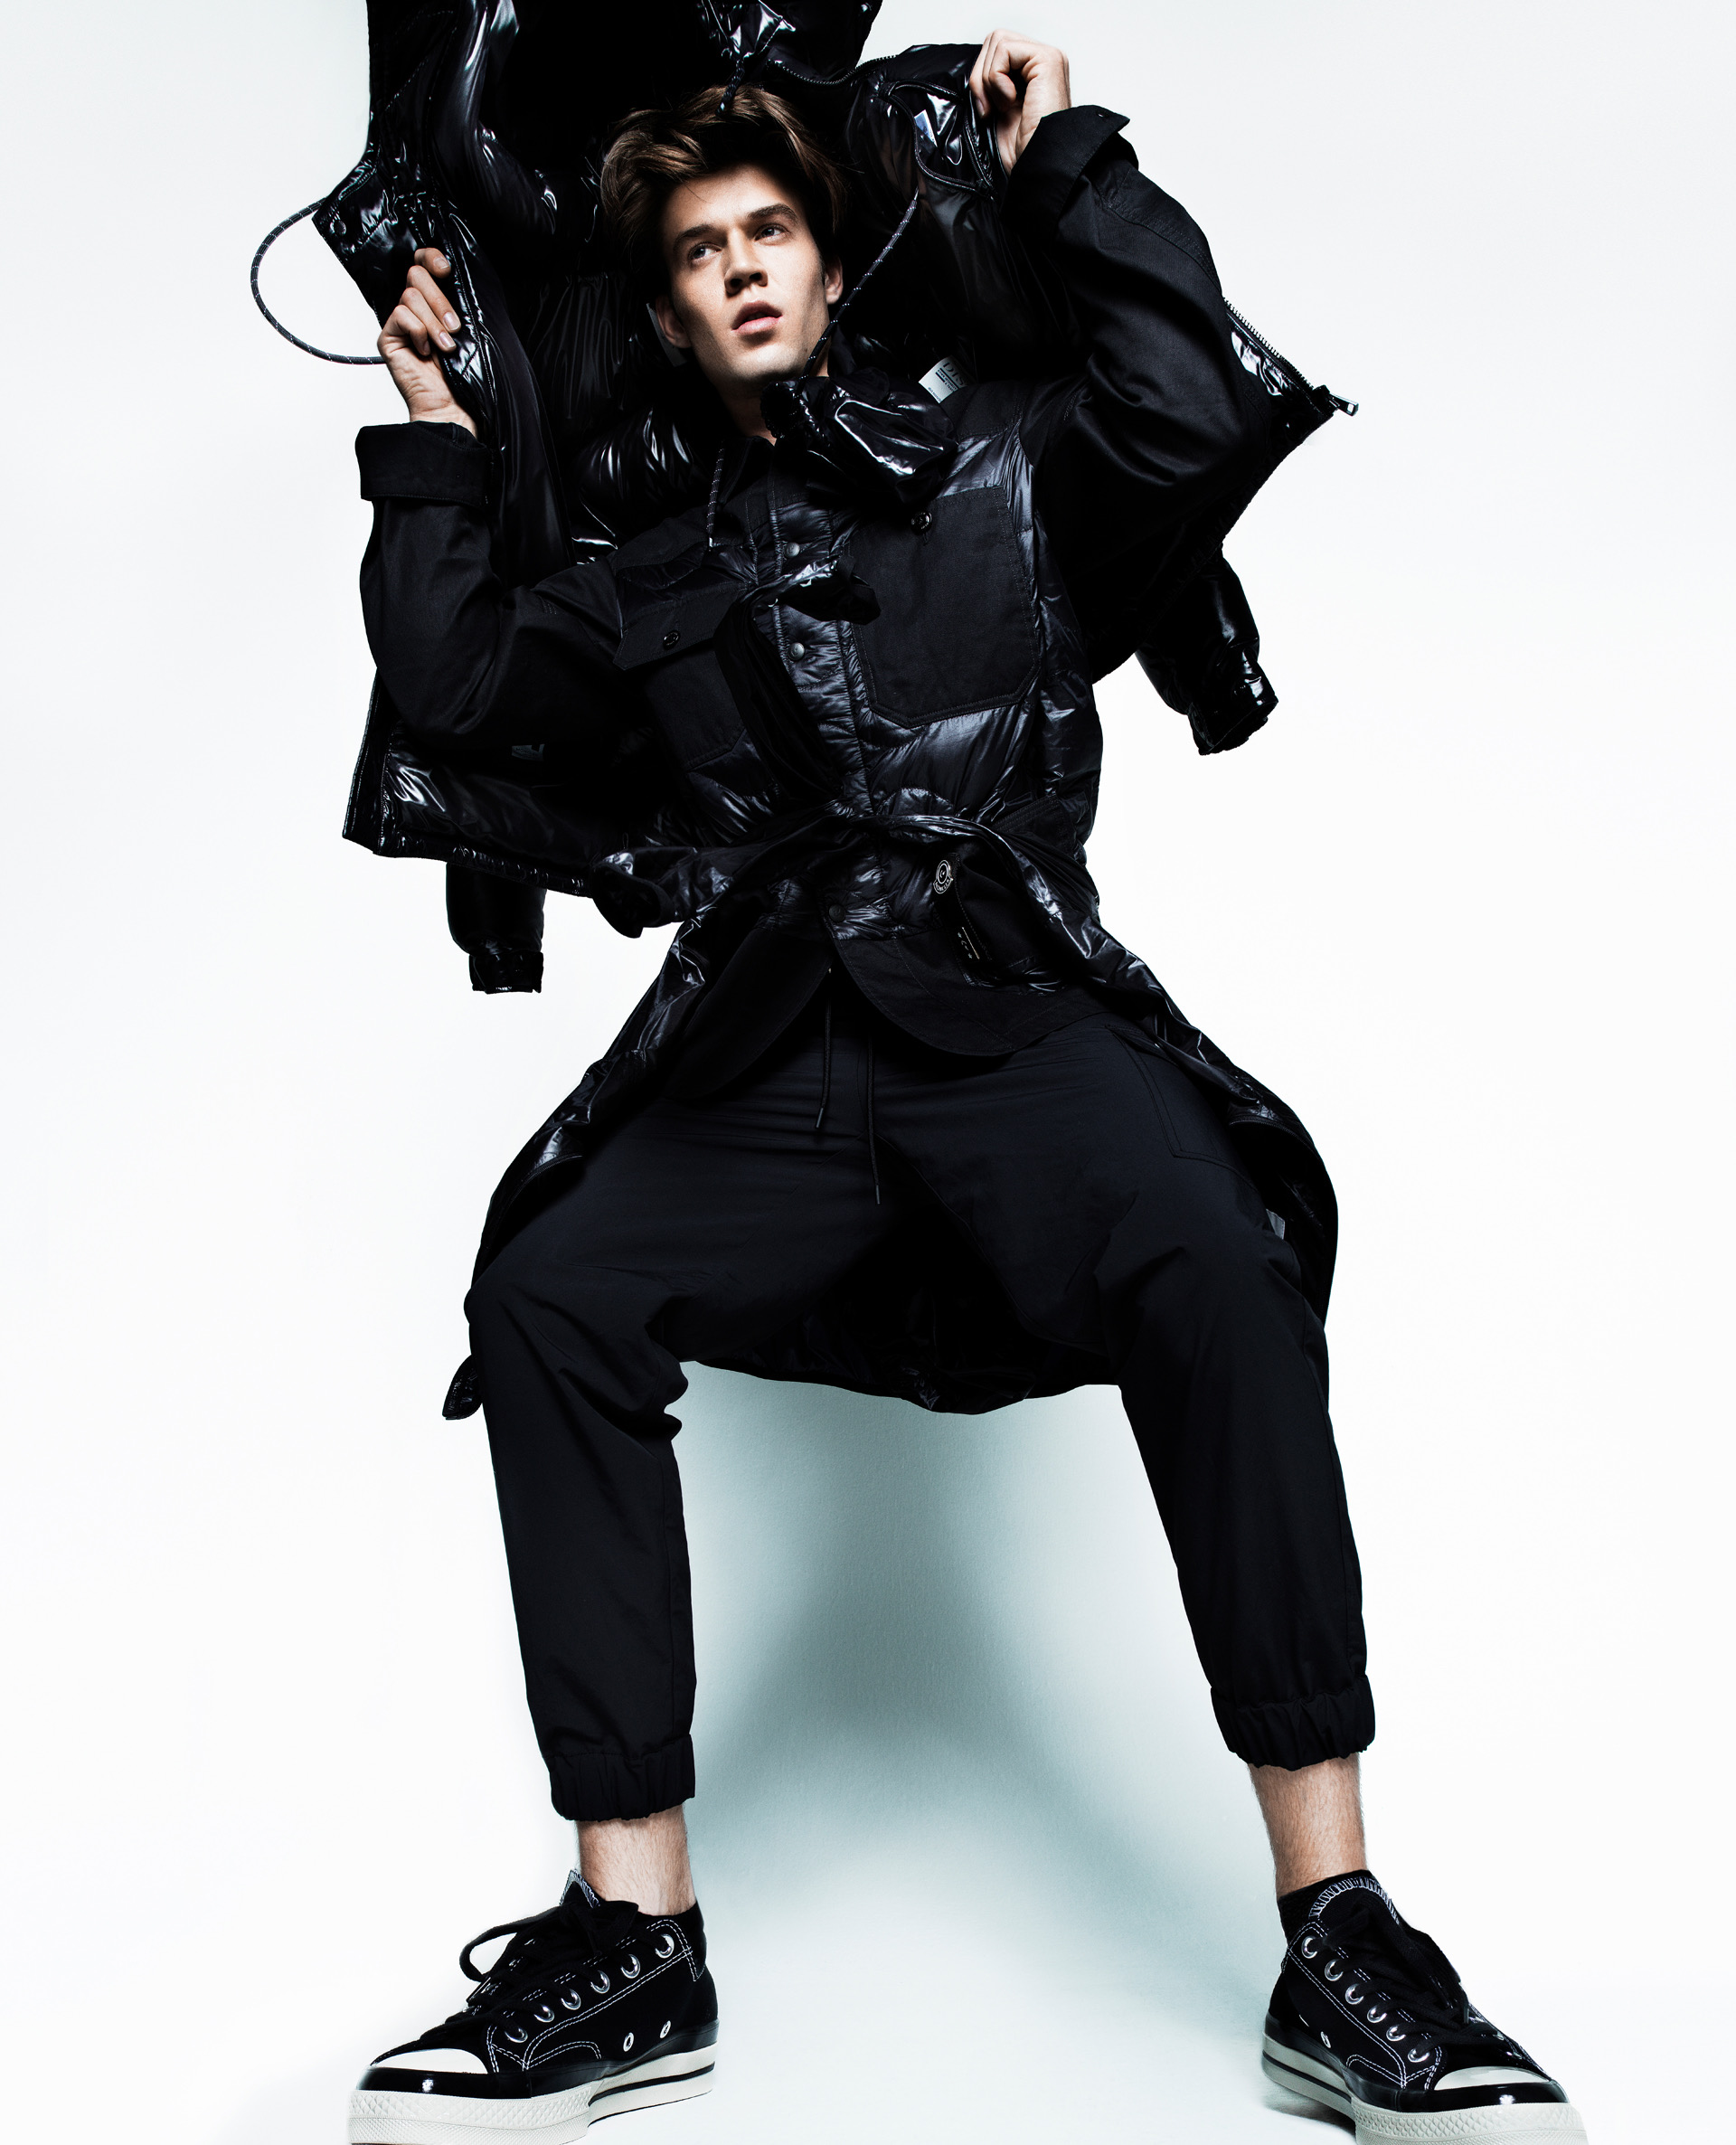 Colin Ford is Taking Over Hollywood like a Monster - V Magazine